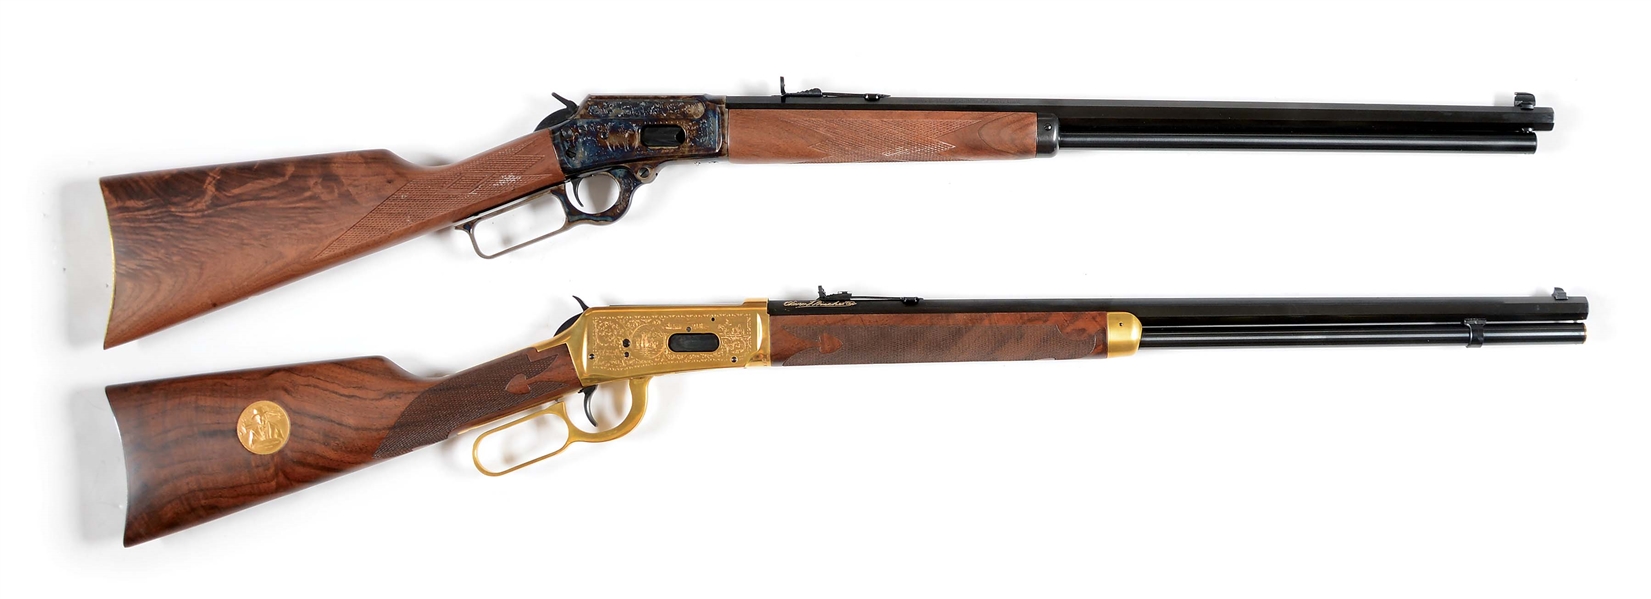 (M) LOT OF 2: MARLIN 1894 .44-40 LEVER ACTION RIFLE AND WINCHESTER COMMEMORATIVE .38-55 LEVER ACTION RIFLE.